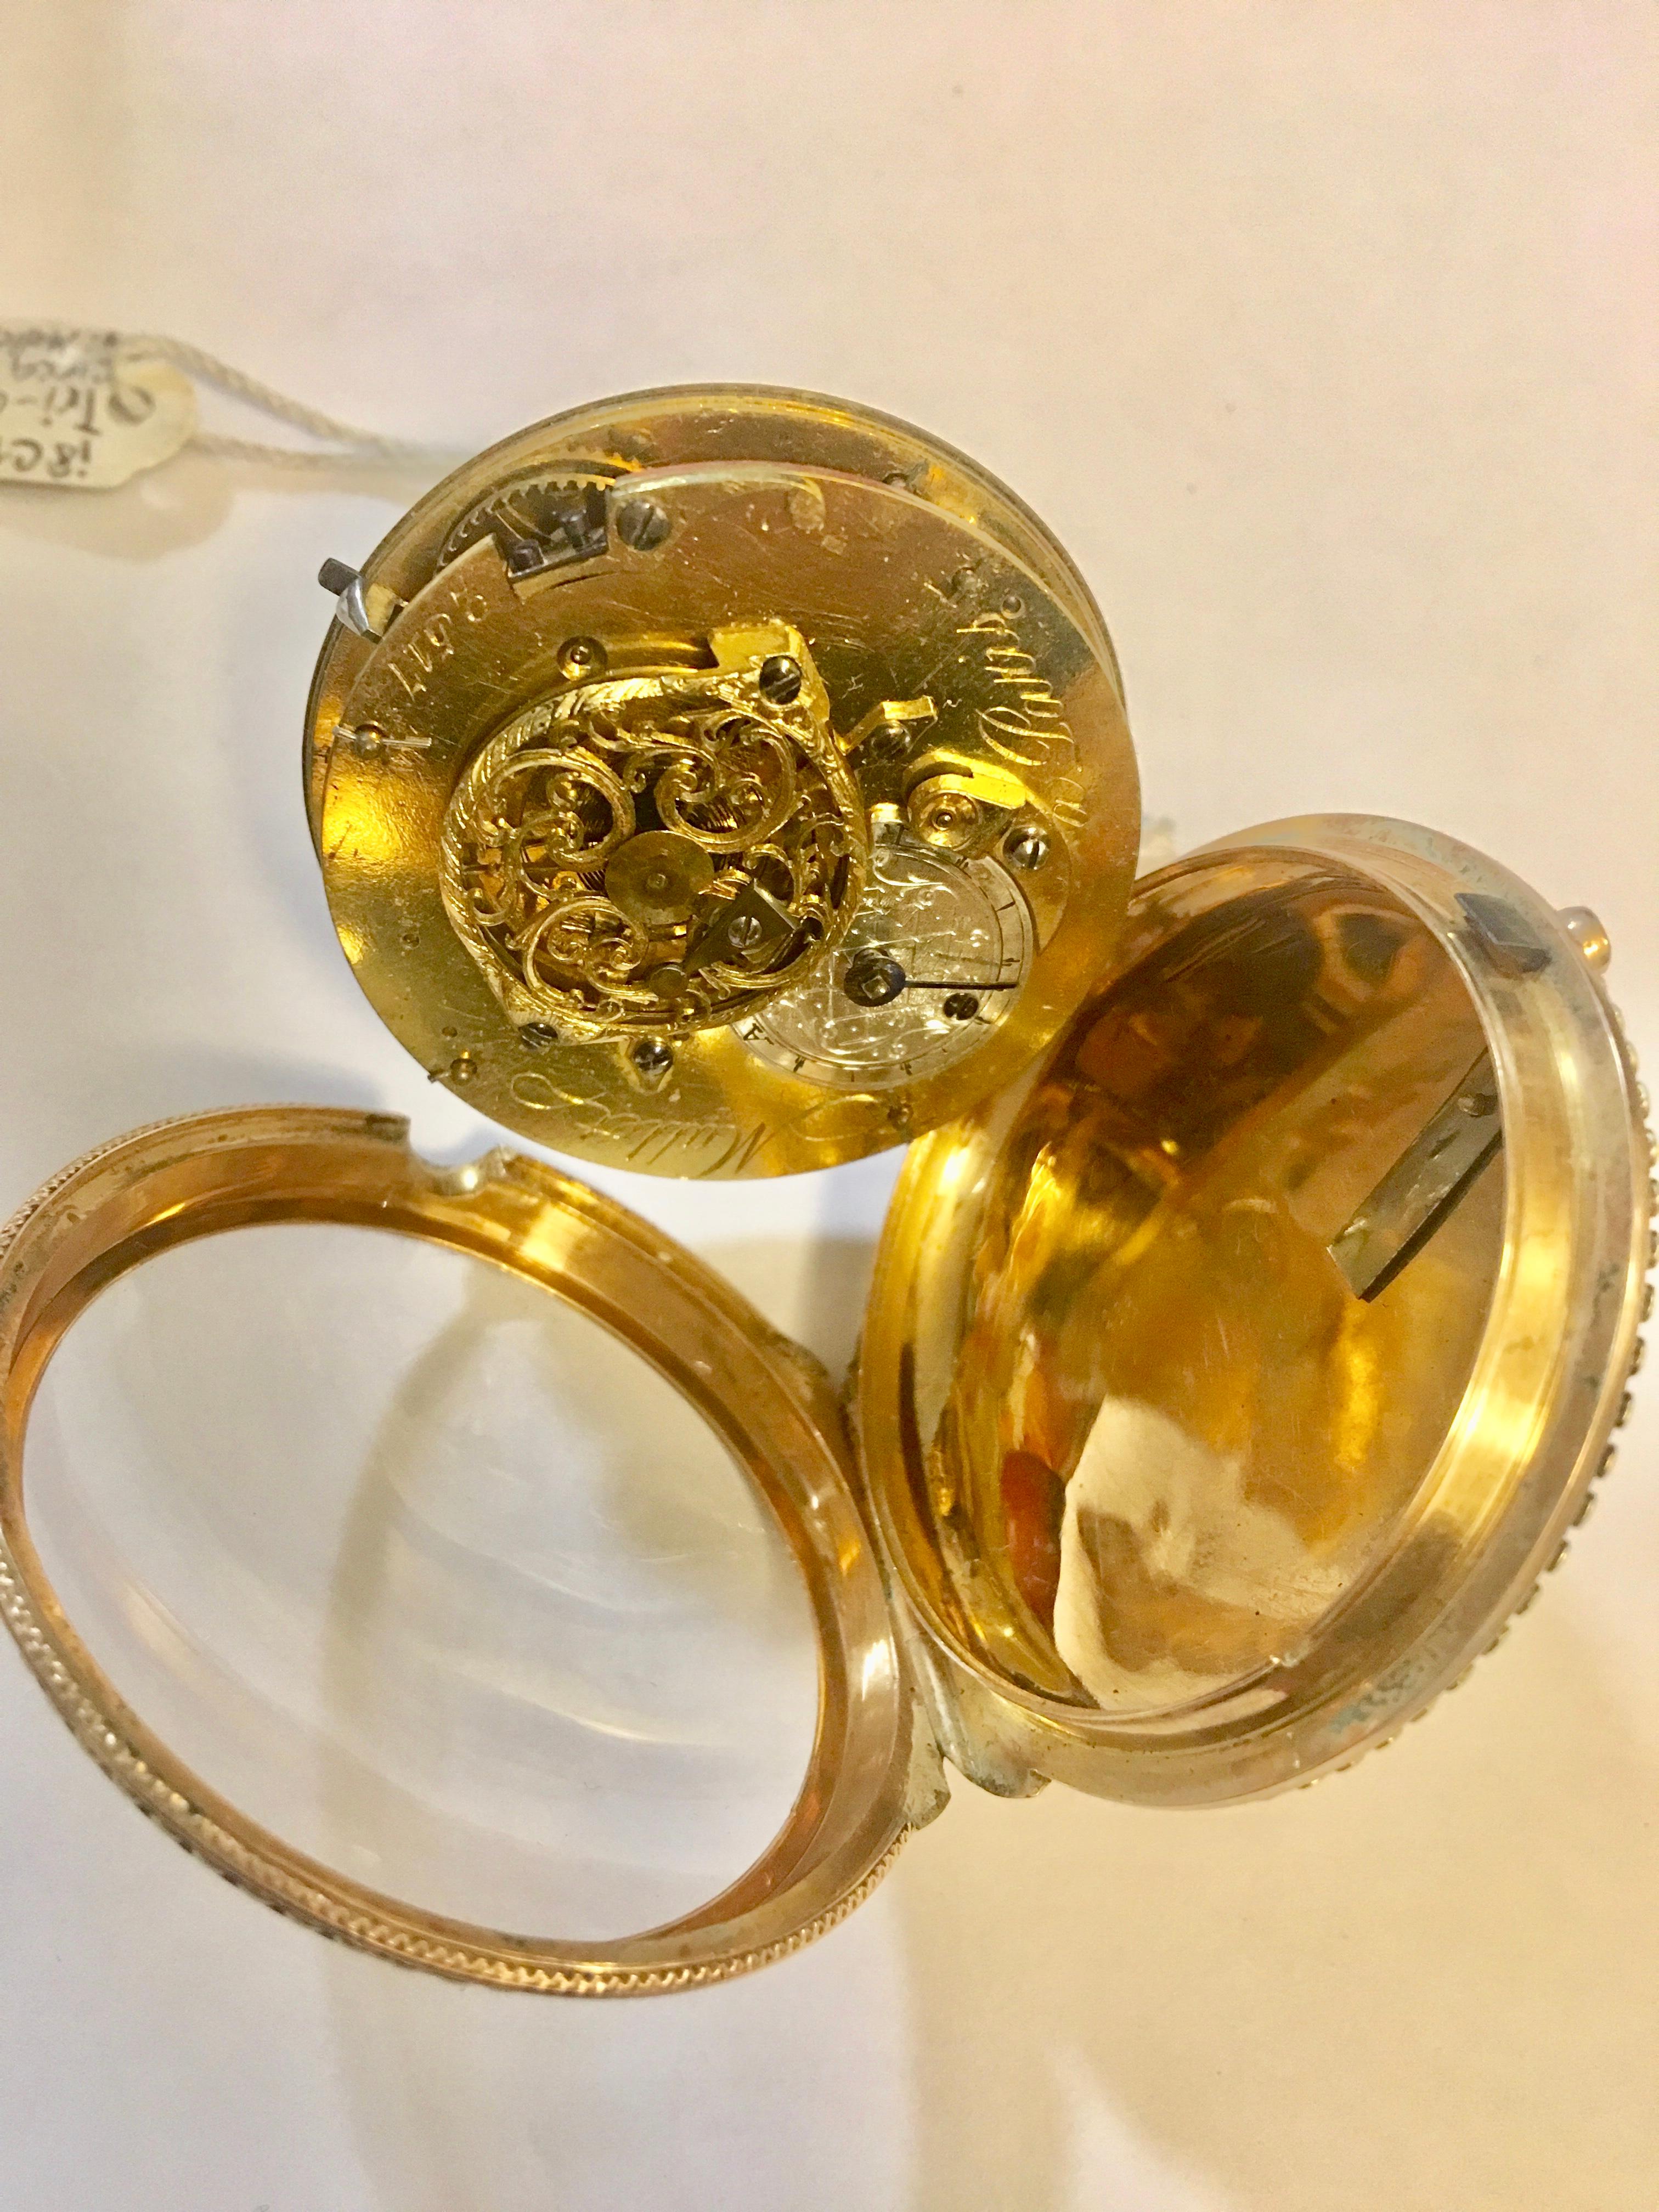 A beautiful finely made tri-color 18-karat gold by Mallet A Paris. The ornately designed case features a man, woman and a cherub inset as the focal point, surrounded by intricate and detailed foliage and floral design. All decorated in rose gold,